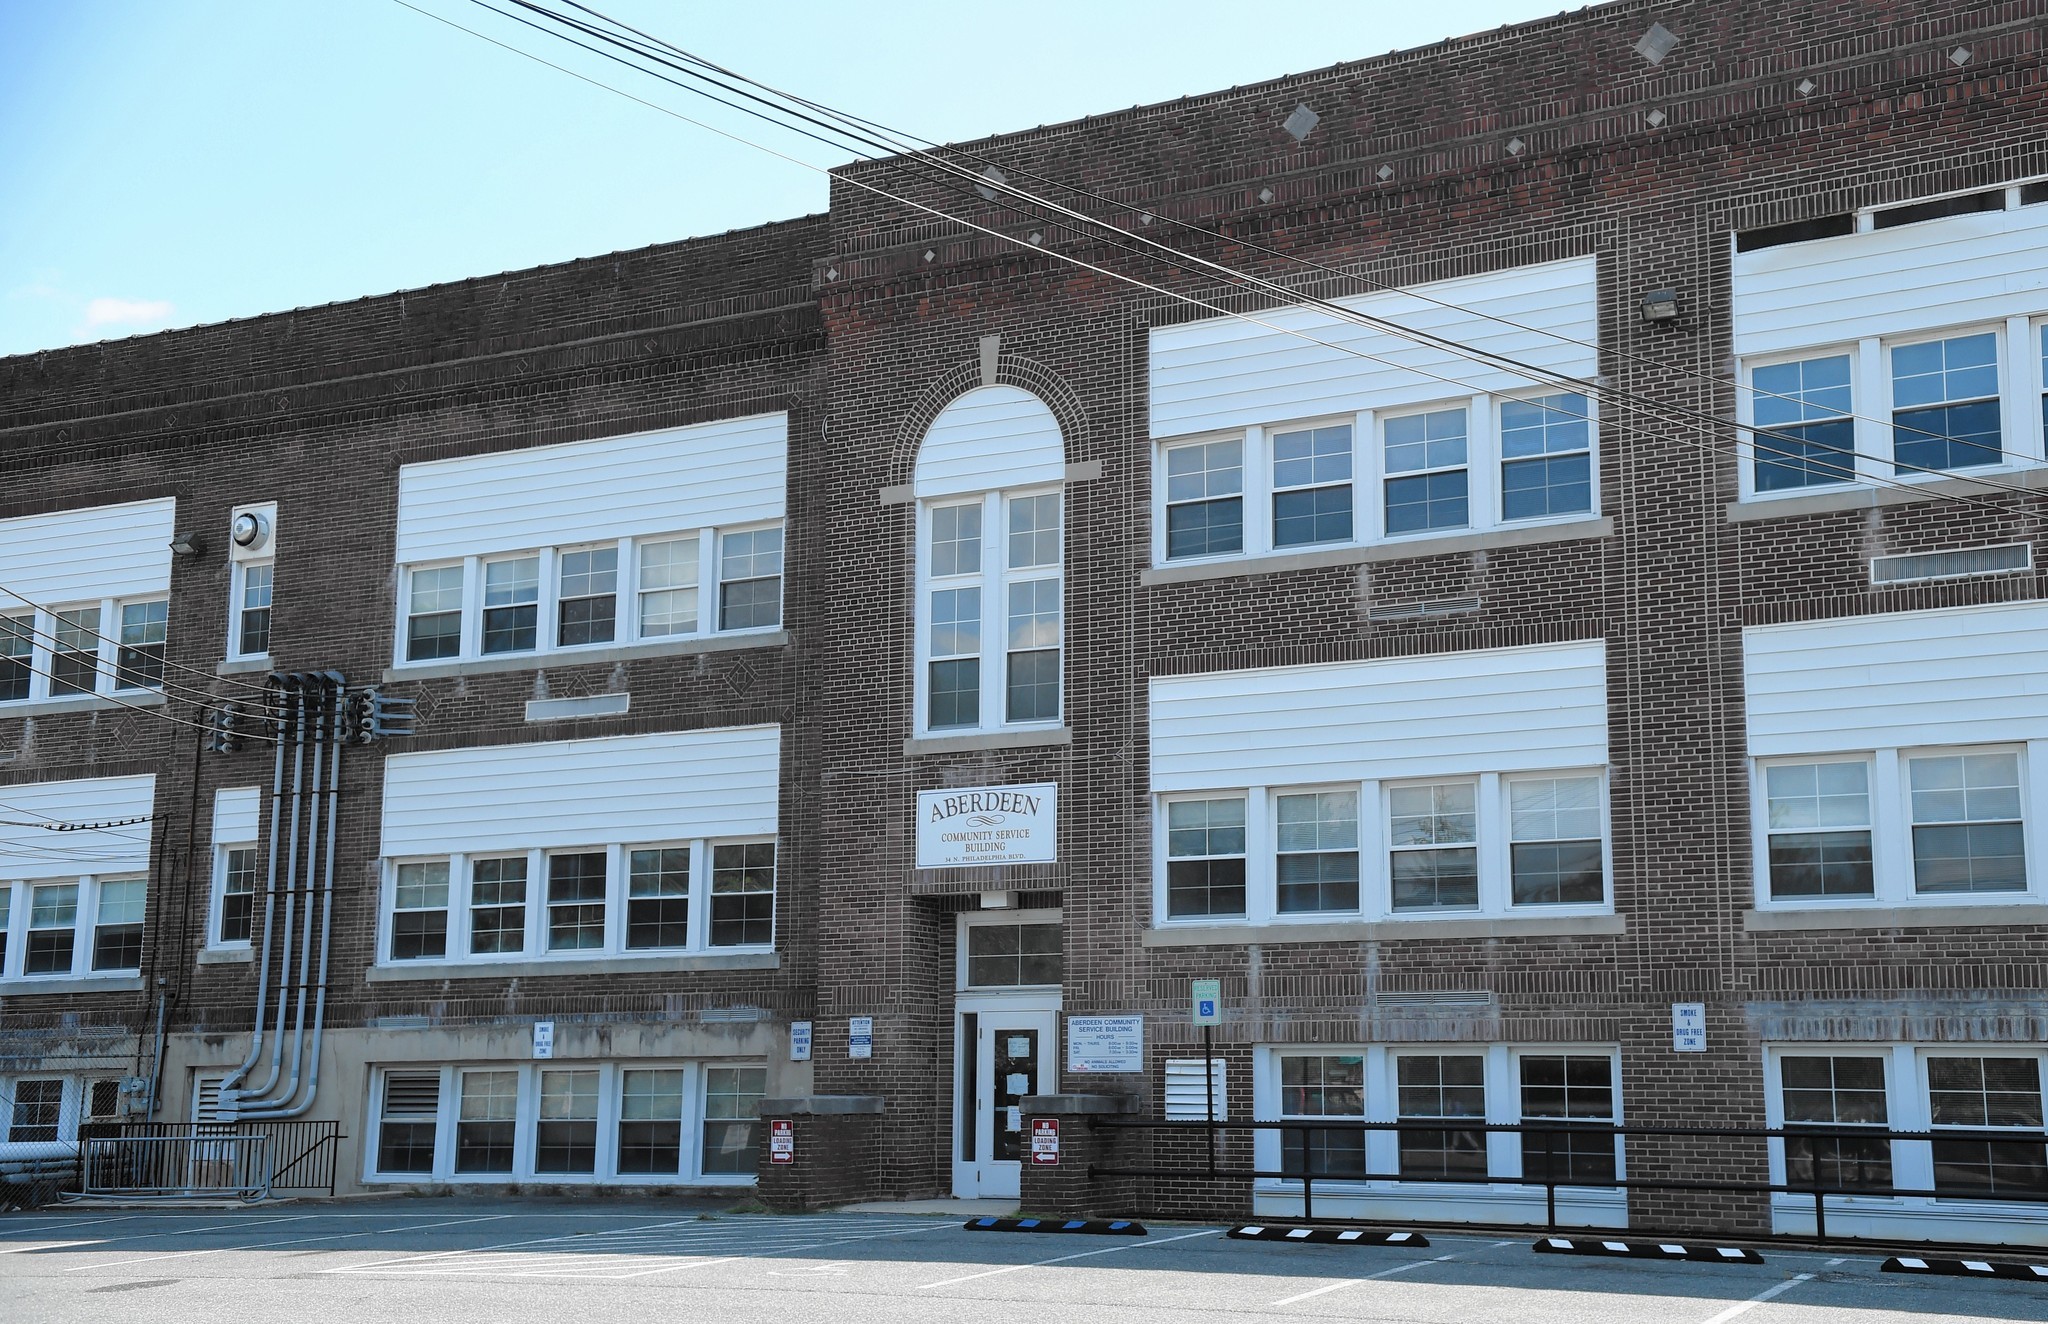 Aberdeen eyes former high school building for community center - The ...